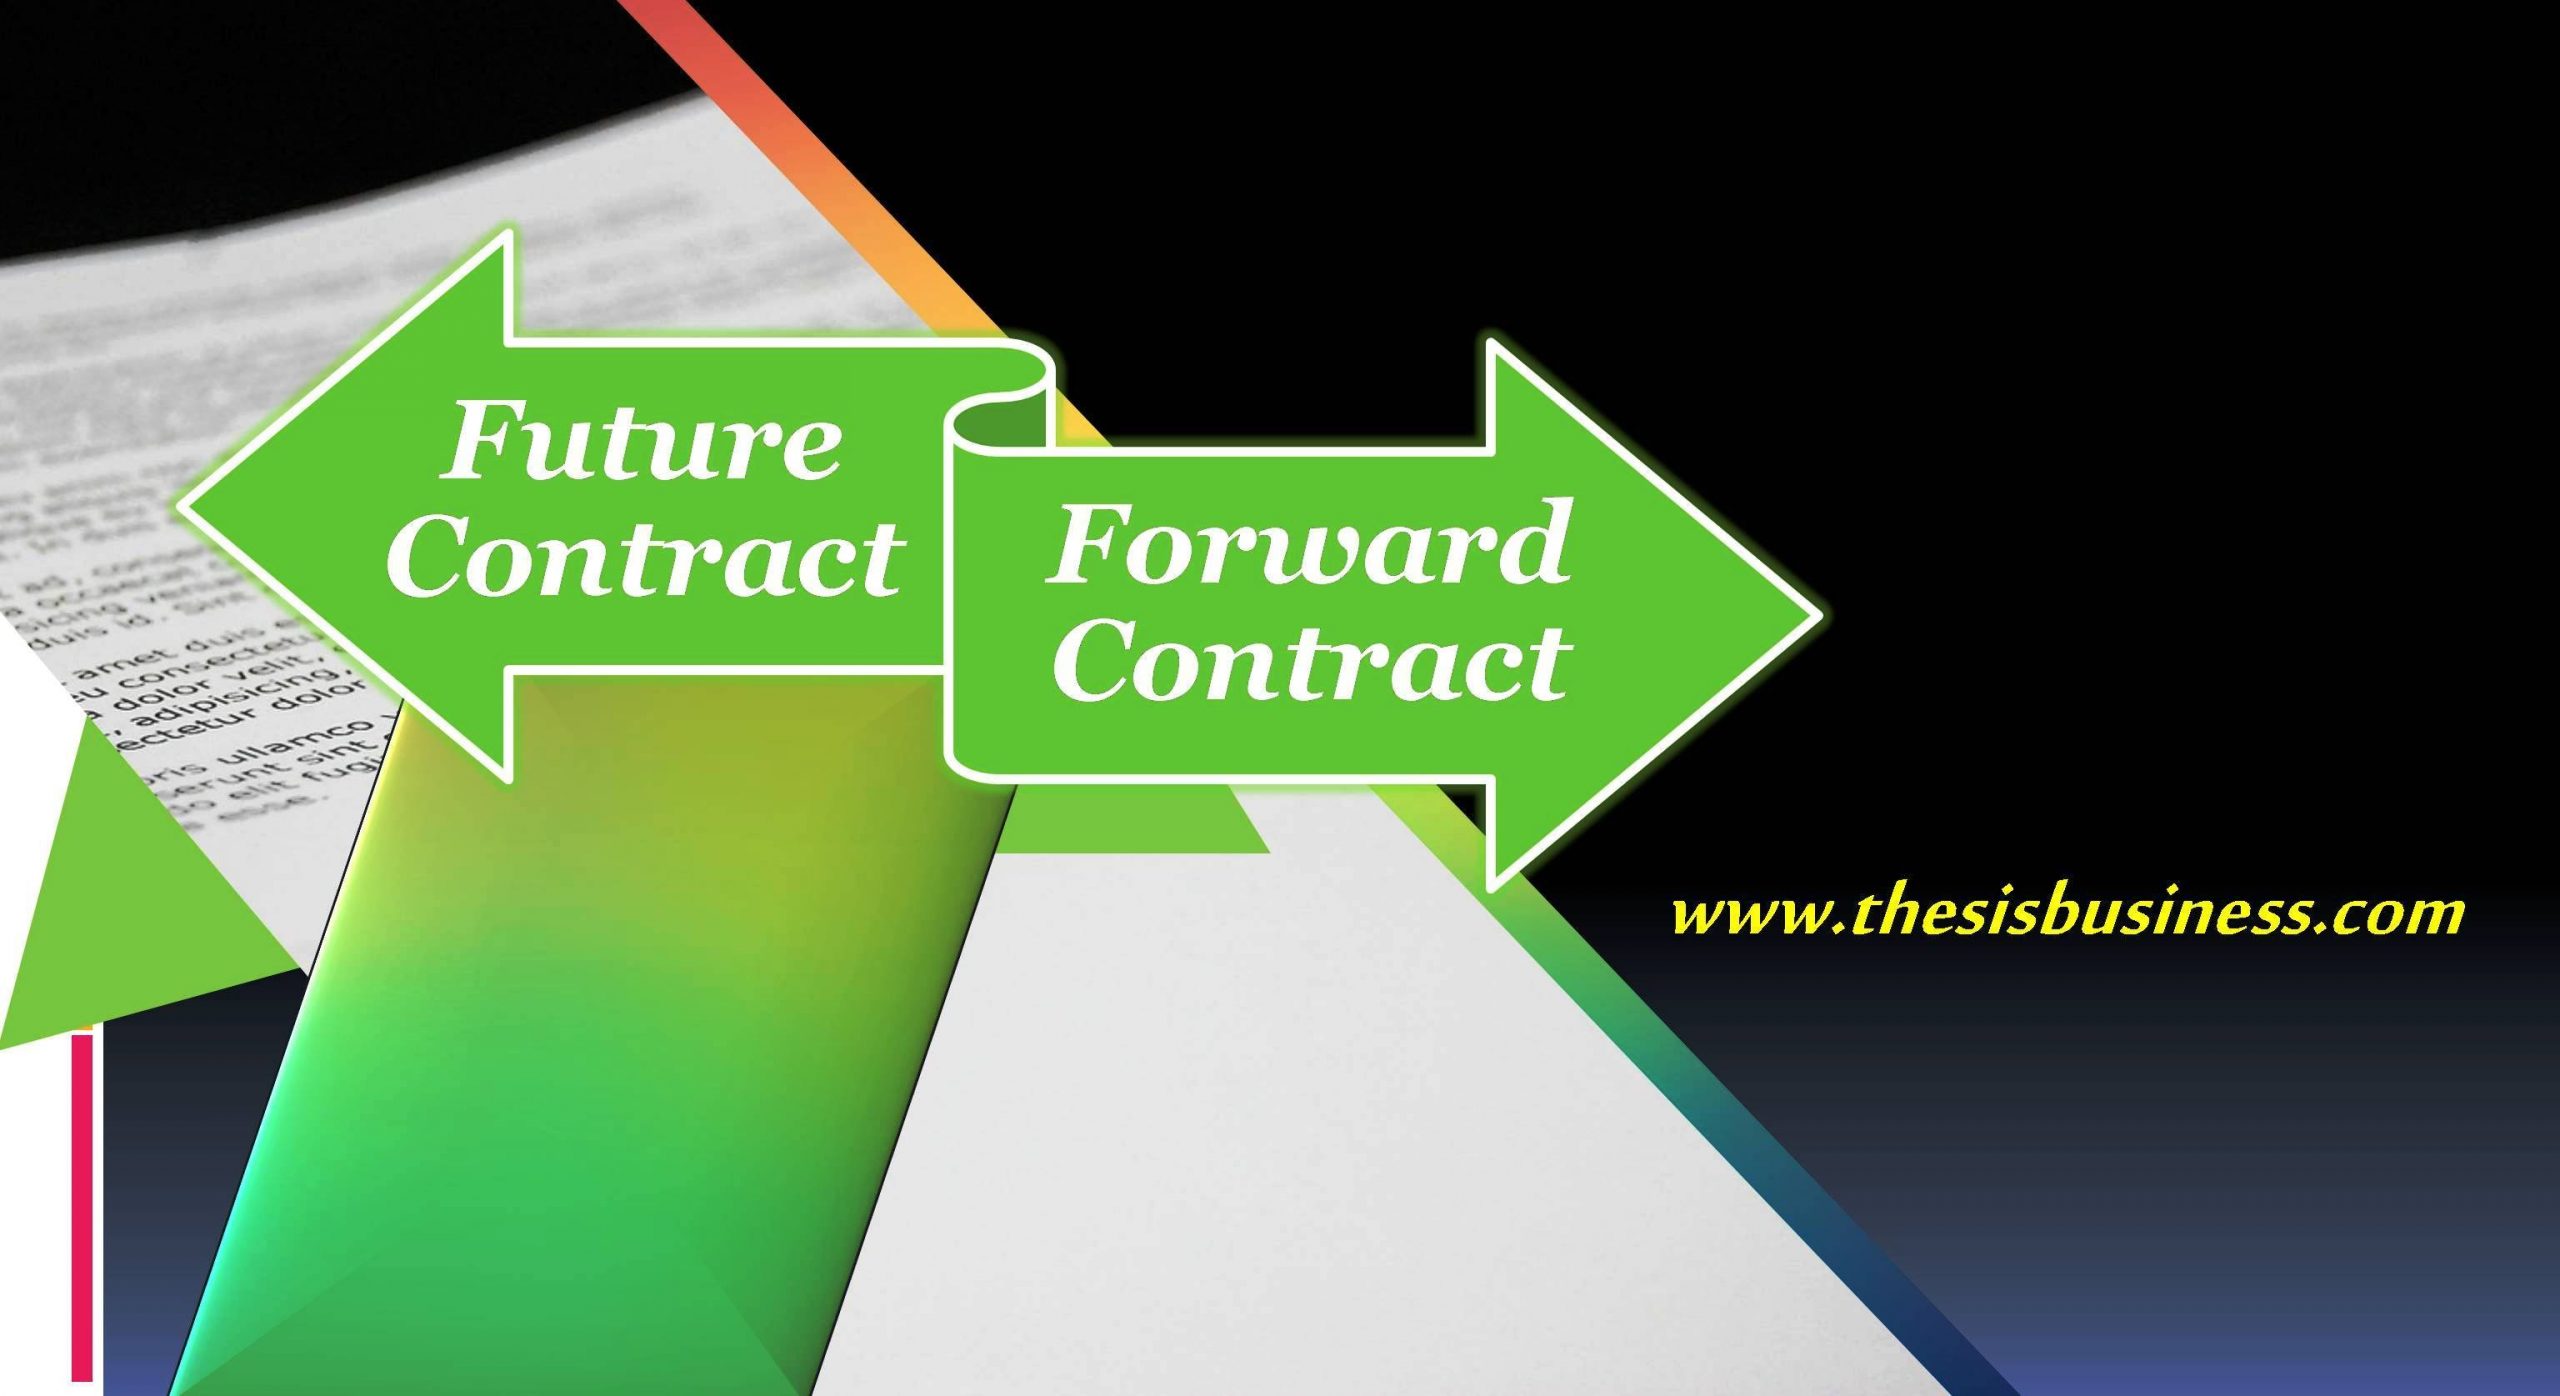 Difference between Futures and Forward Contract